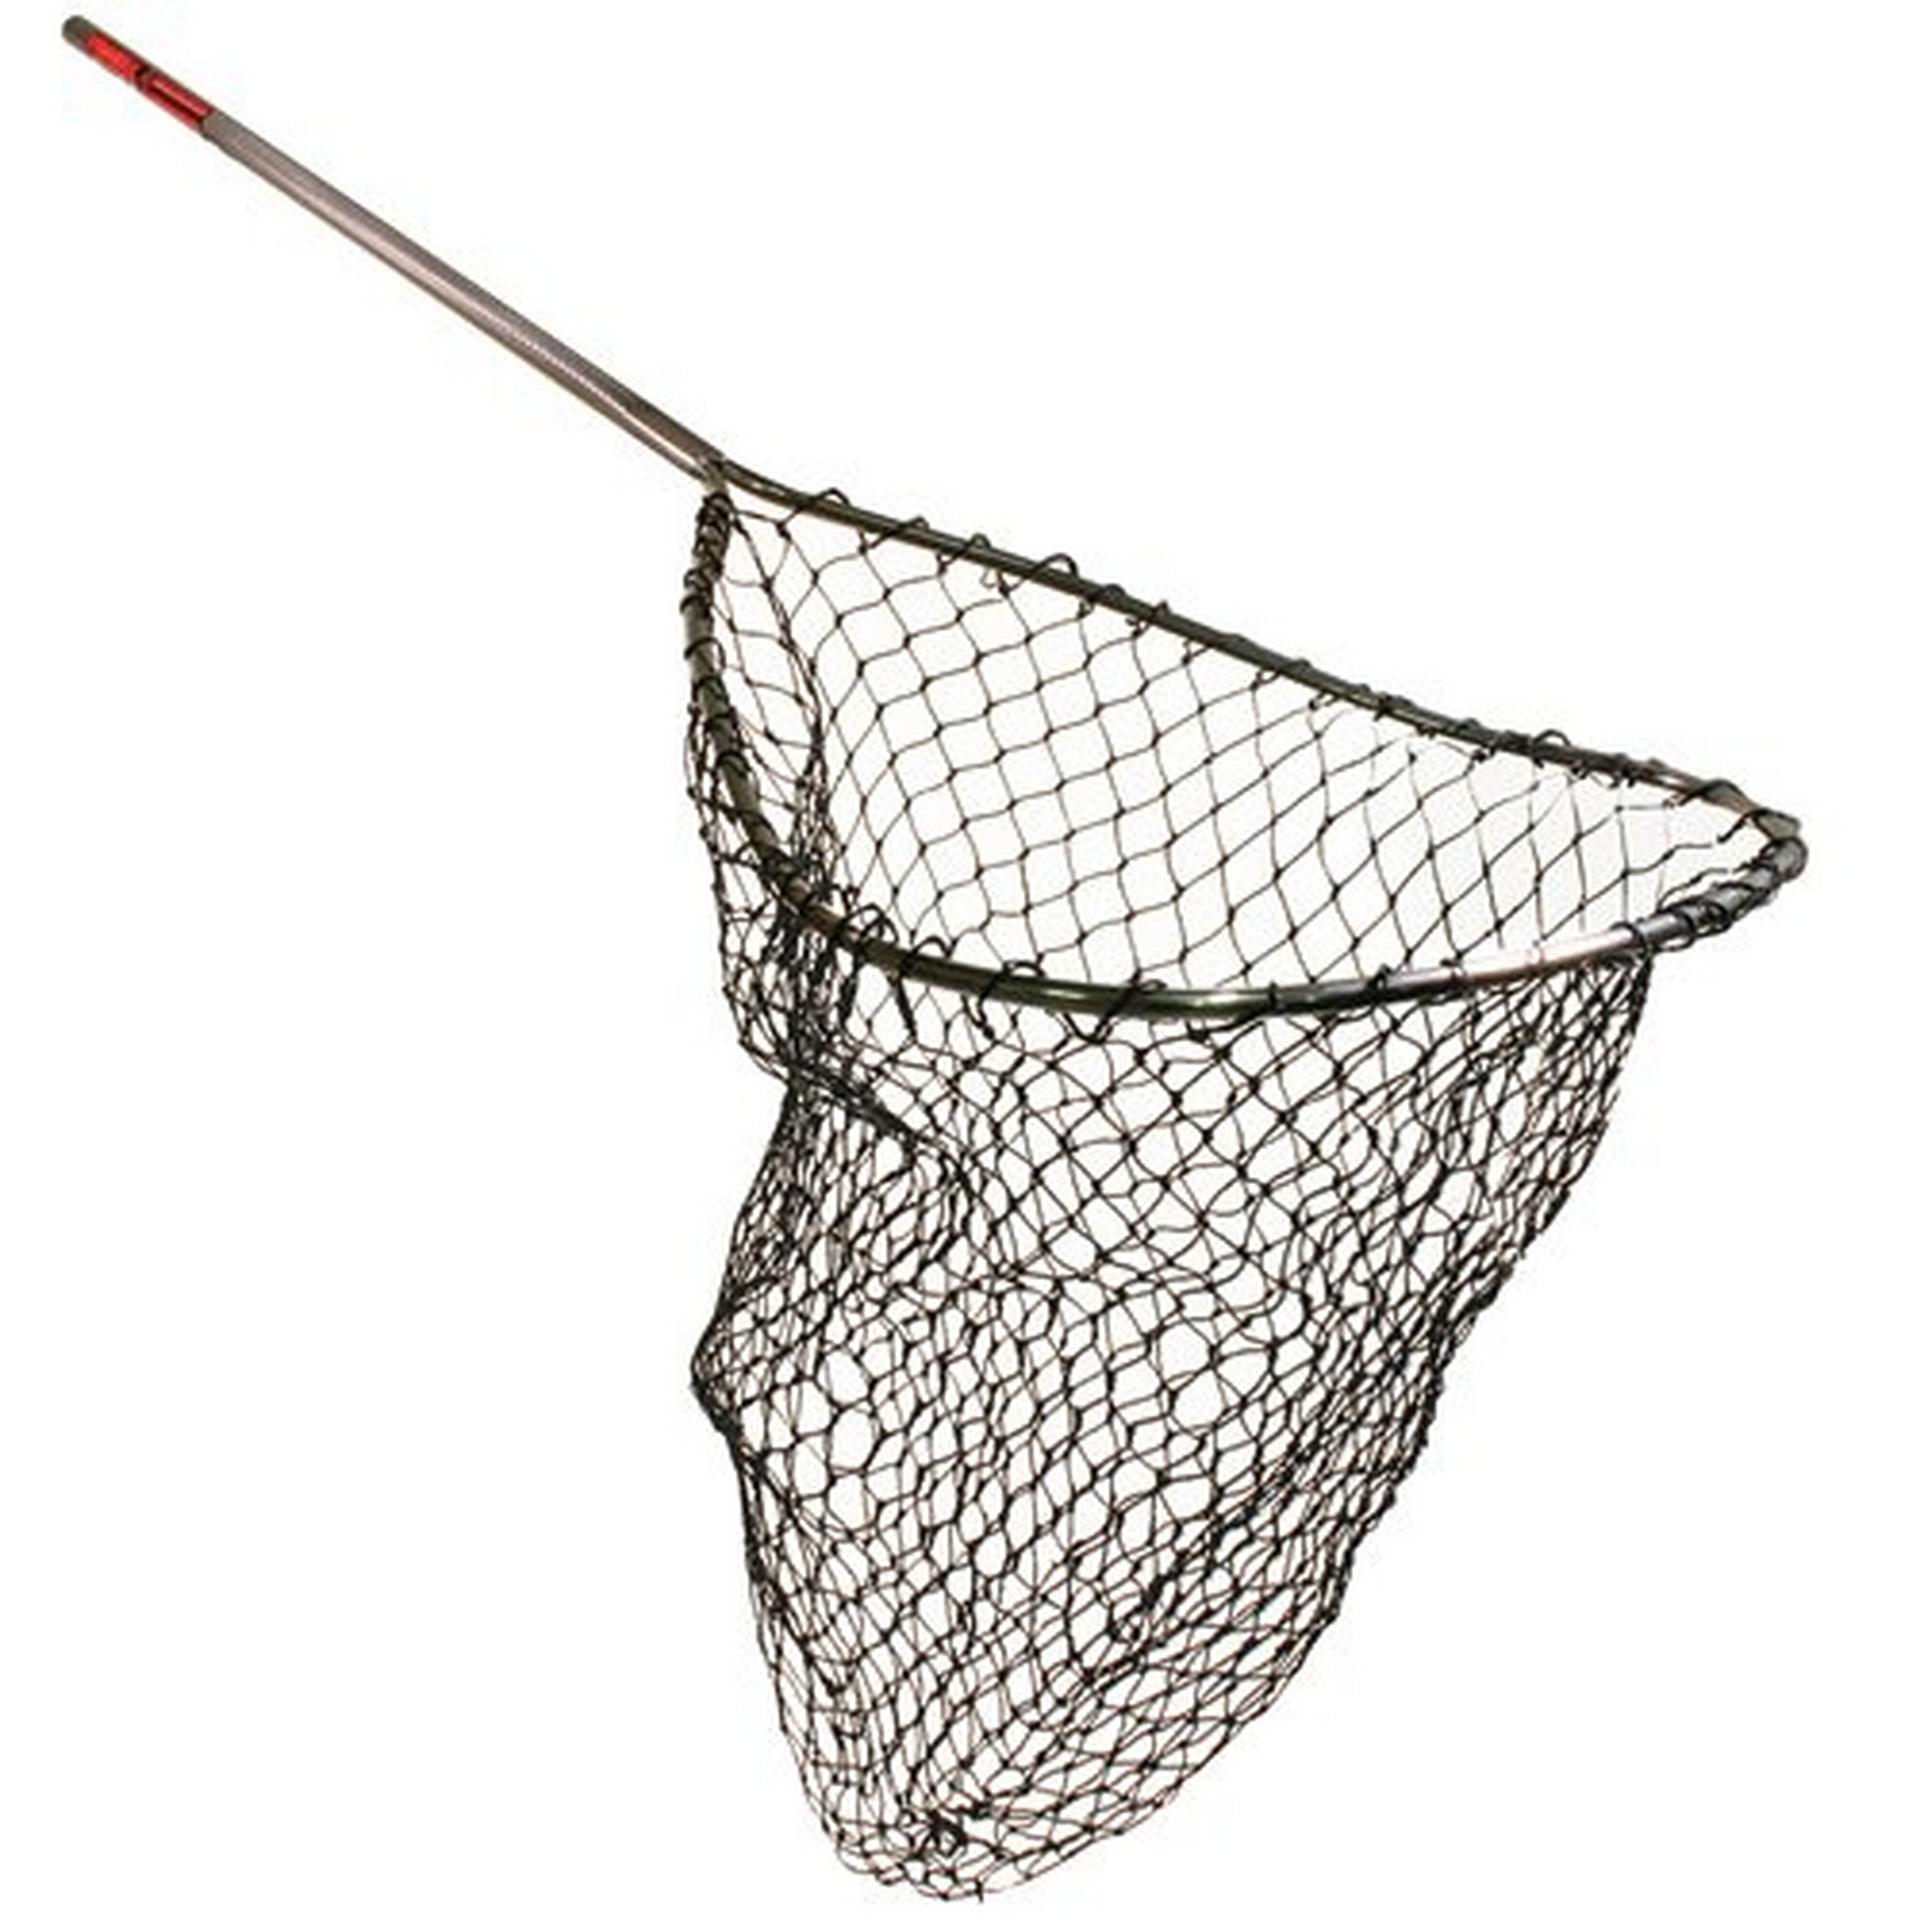  Frabill Smelt/Shad Net with D Shaped Hoop and 202-Inch  Telescopic Handle (Micro-Mesh Net), 17 x 19-Inch : Sports & Outdoors